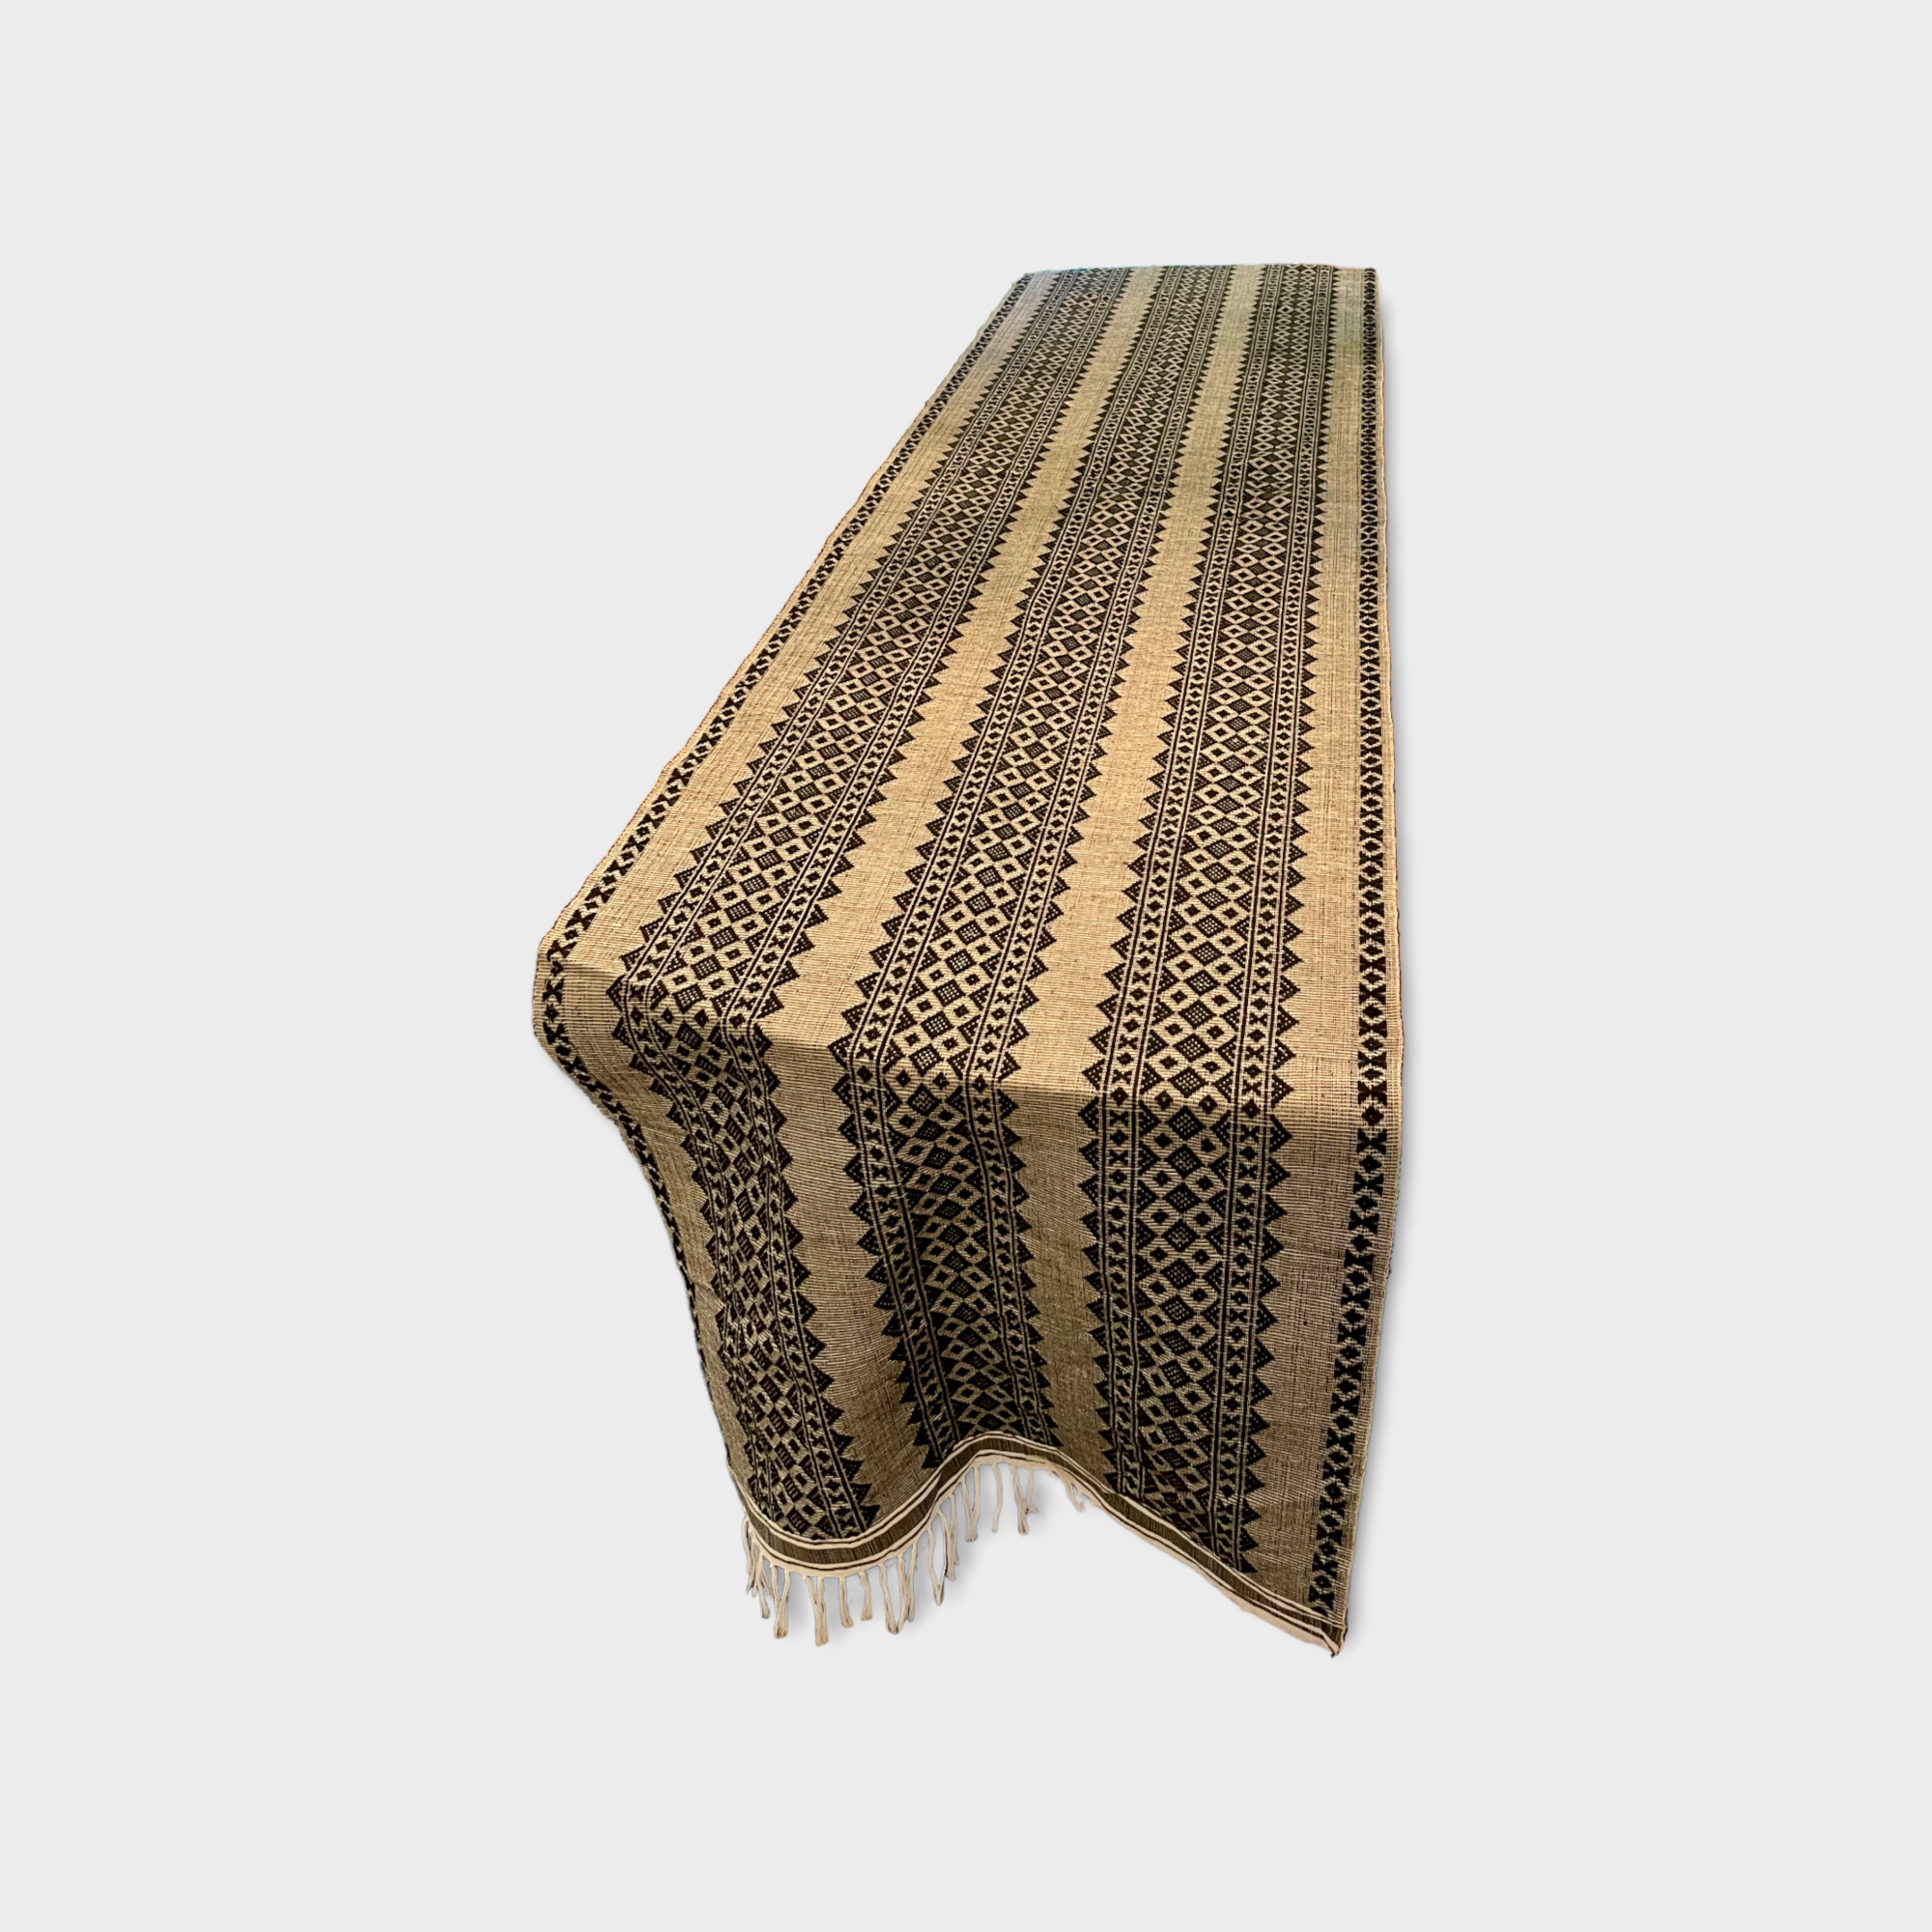 Inabel bed or table runner, Black